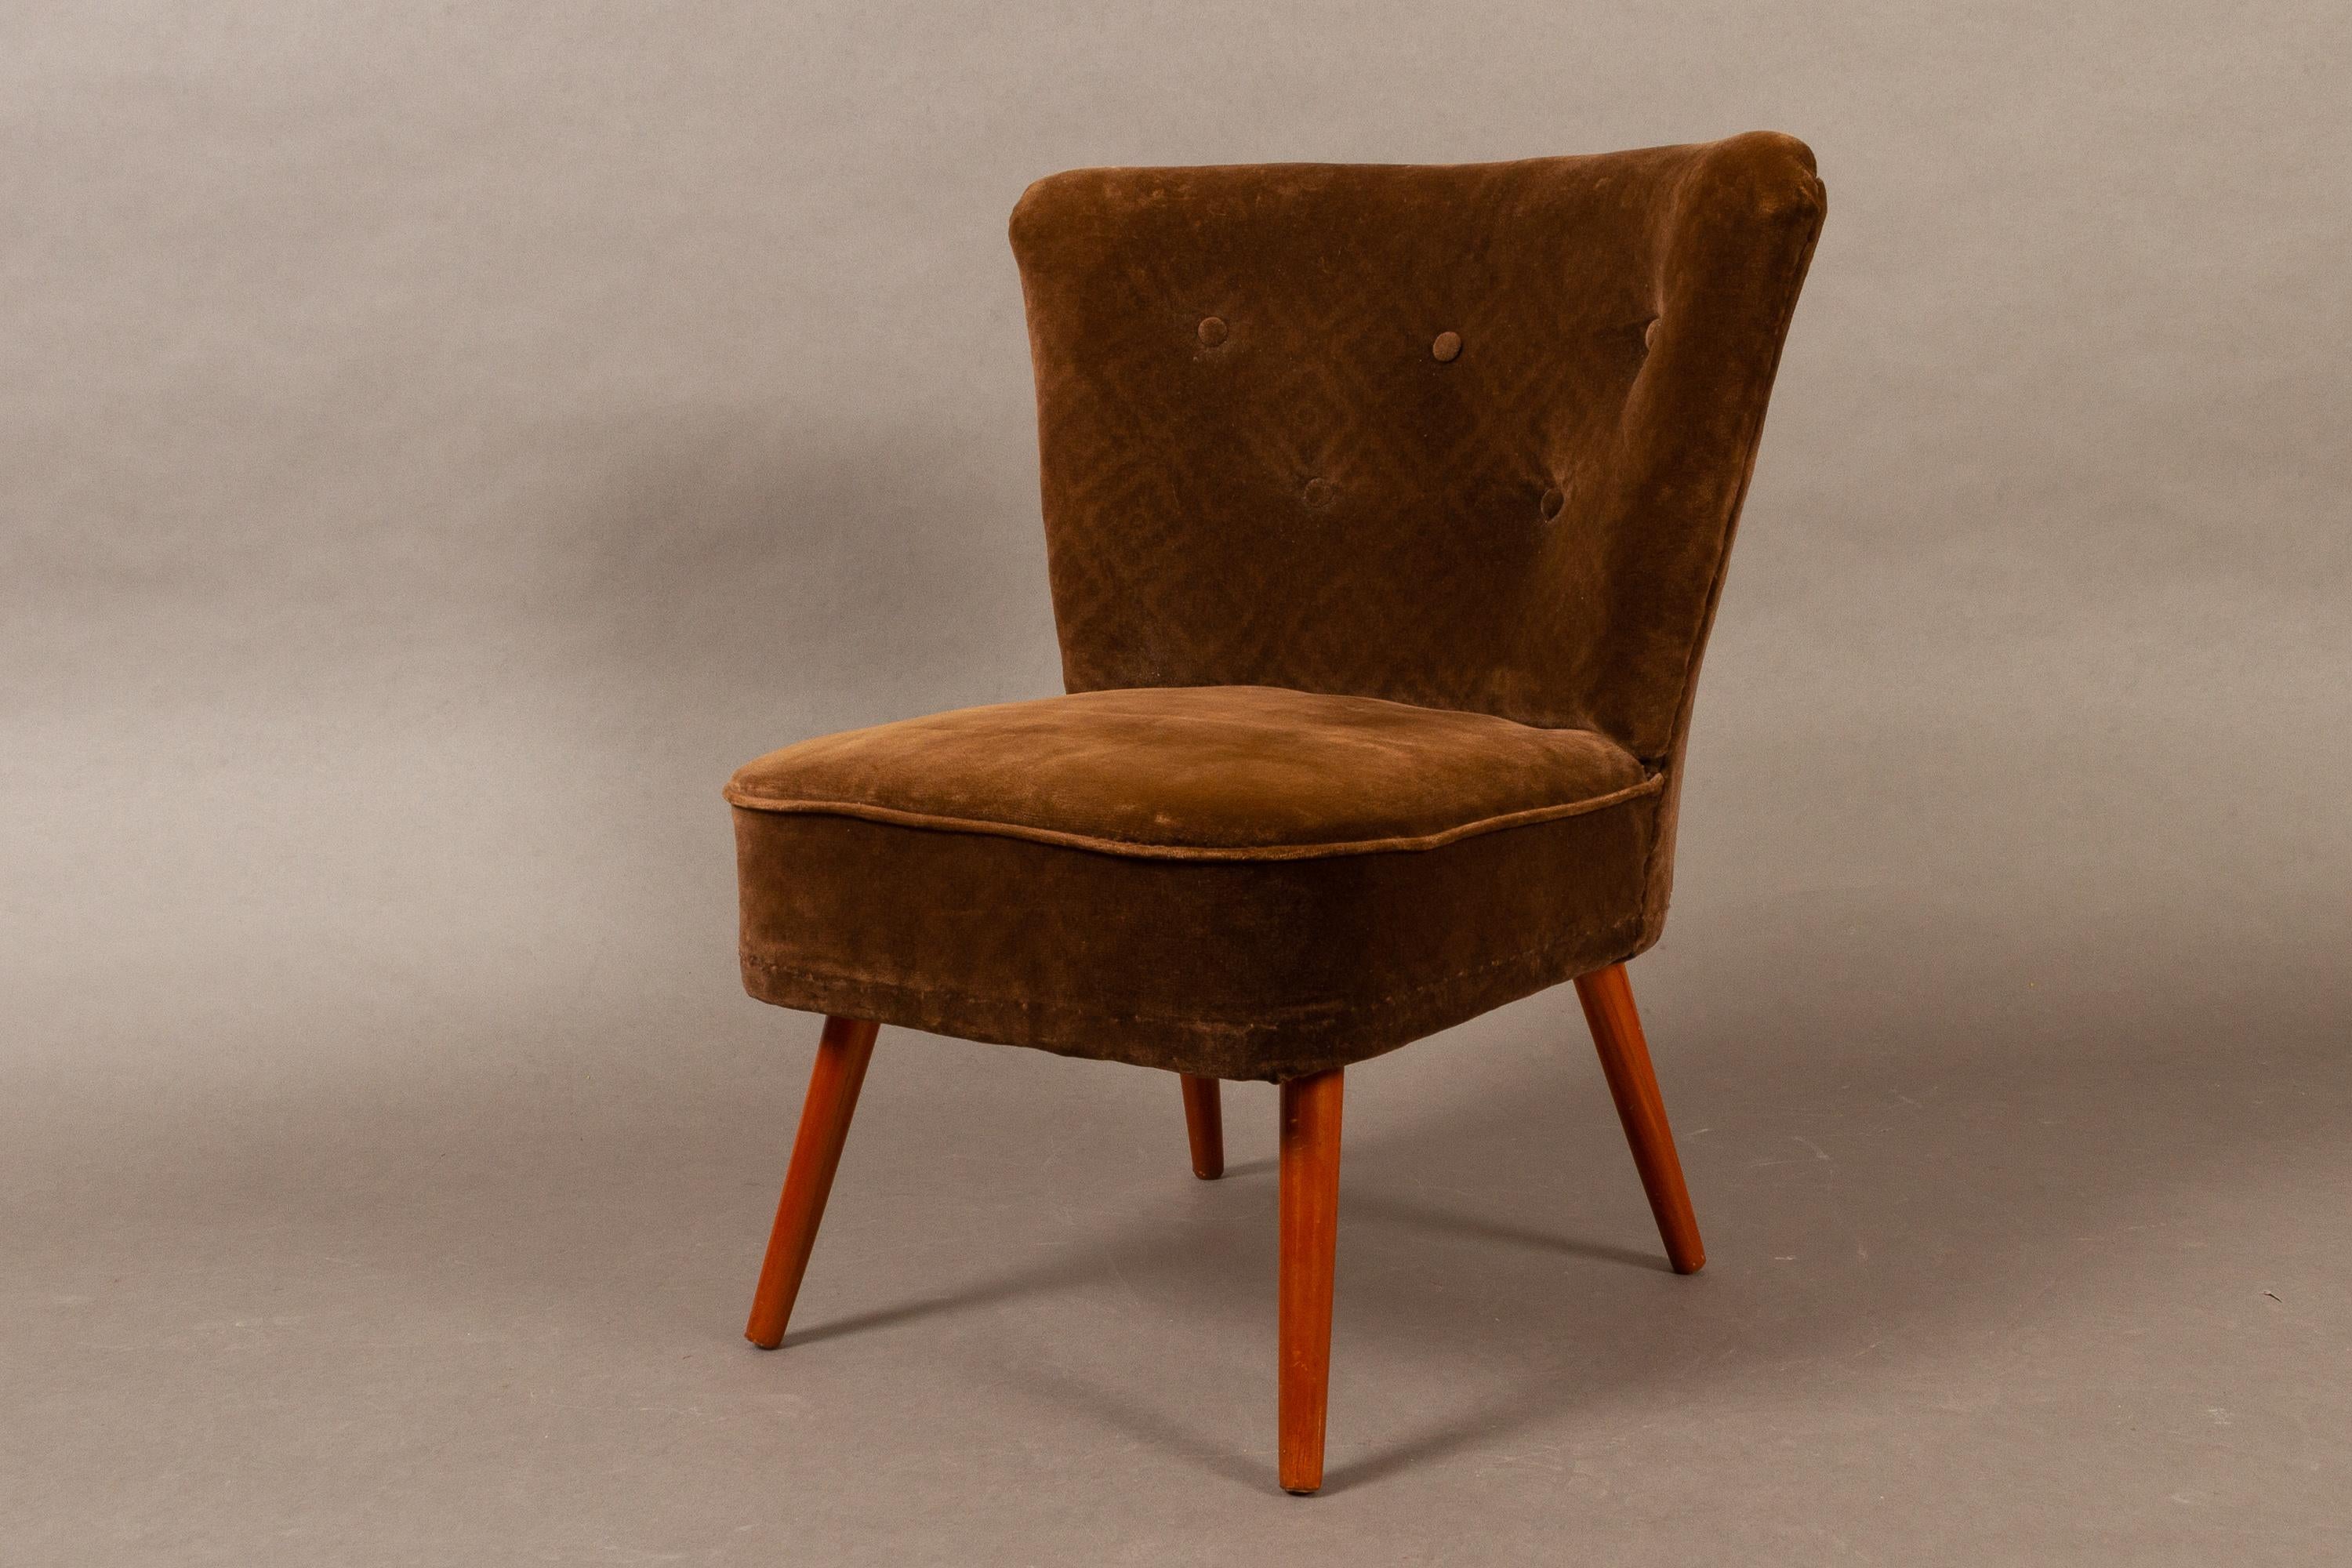 Vintage German velvet cocktail chair, 1960s.
Made by VEB Polstermöbelverkstätten Aue in former DDR.
Dark brown patterned velvet upholstery with buttons. Standing on round tapered legs in stained wood.

                  